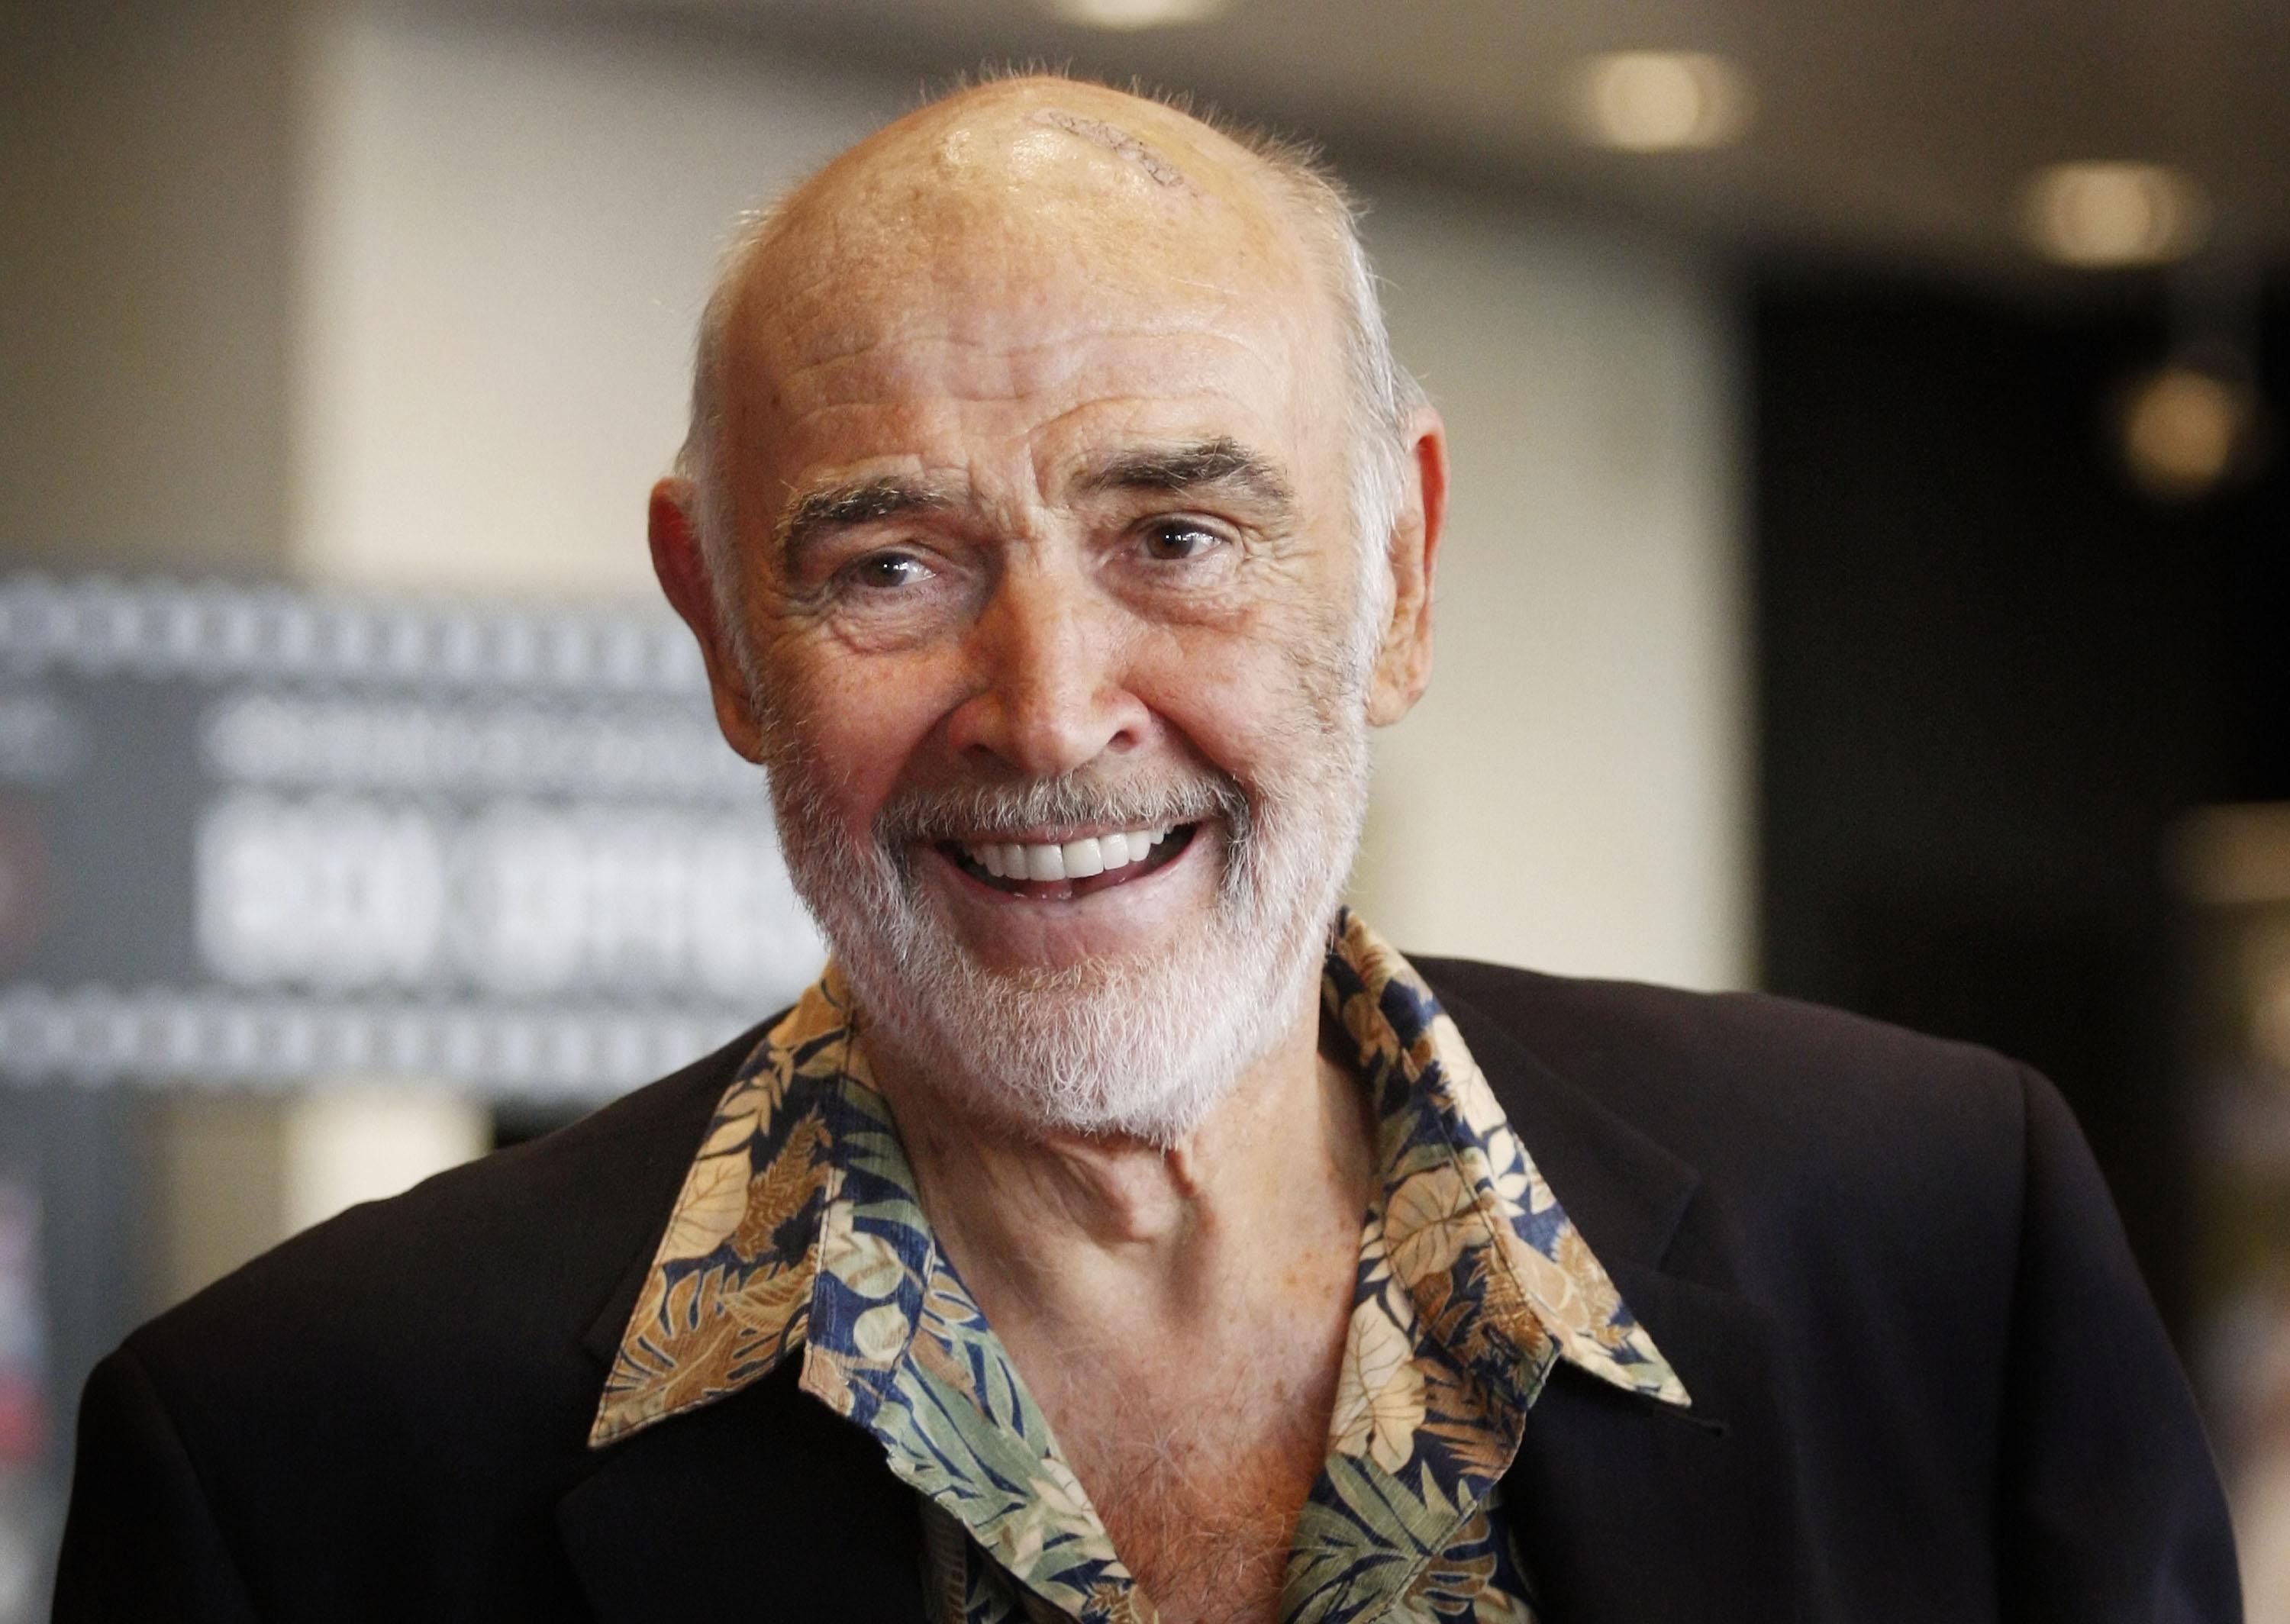 Sir Sean Connery at a screening of the 1975 classic film "The Man Who Would be King" at the Edinburgh International Film Festival in Edinburgh, Scotland | Photo: Danny Lawson/PA Images via Getty Images